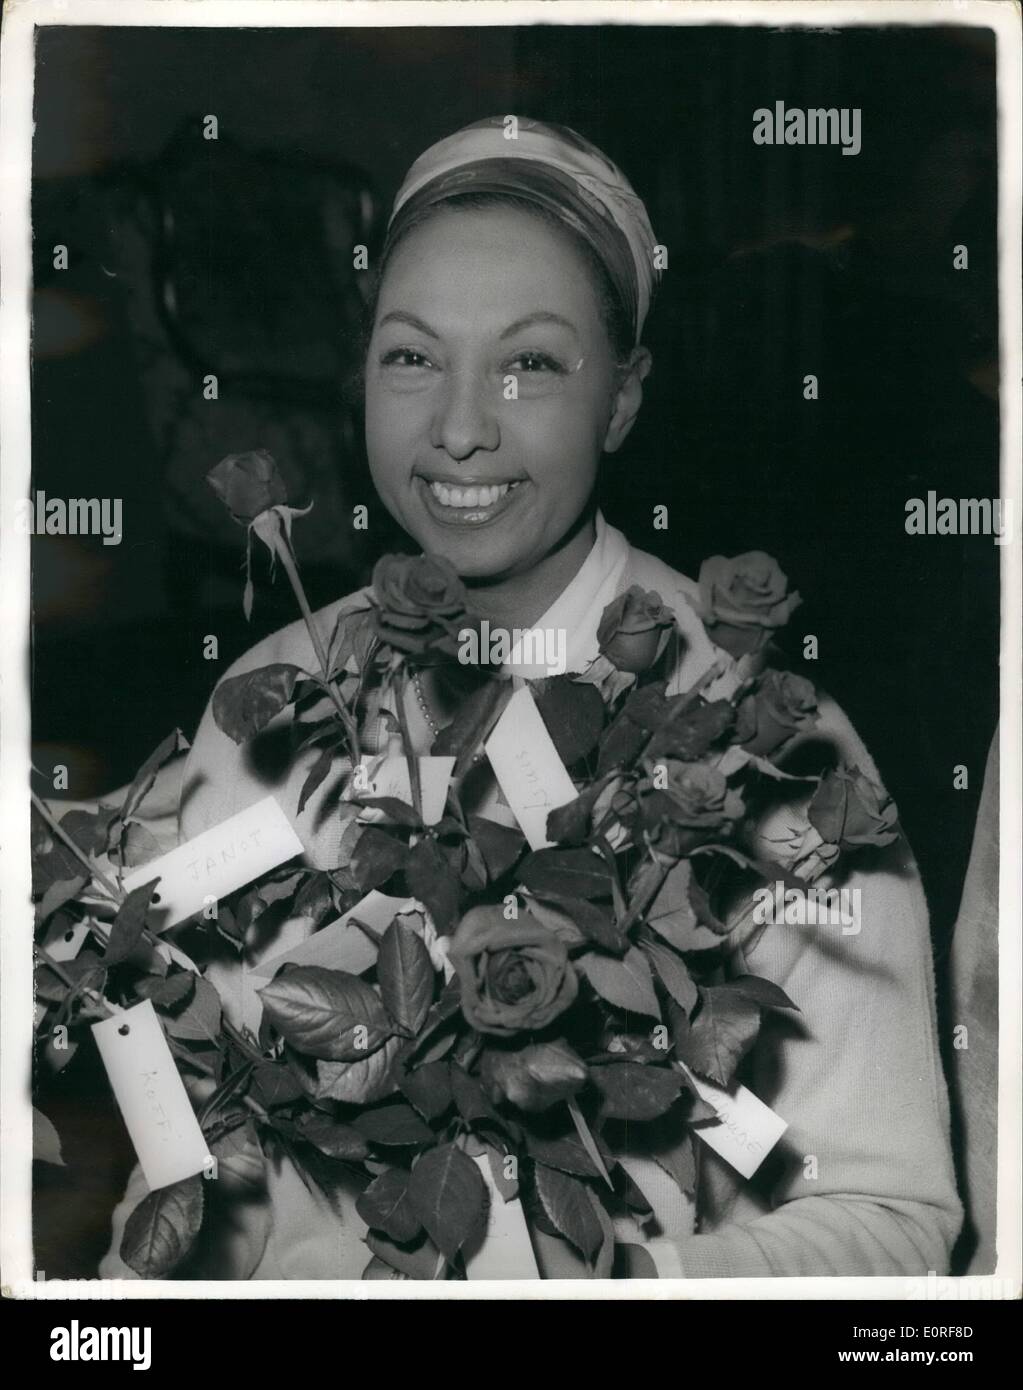 Jun. 06, 1959 - Josephine Baker in London. To Appear on TV tonight.: Josephine Baker, who arrived in London today, takes part this evening in the B.B.C. TV shows ''It Happened To Me'' - which shows scenes from her life and her famous adopted family. Photo shows Josephine Baker with a bunch of red roses sent to her by her adopted children in France - at this afternoon's rehearsal. Stock Photo